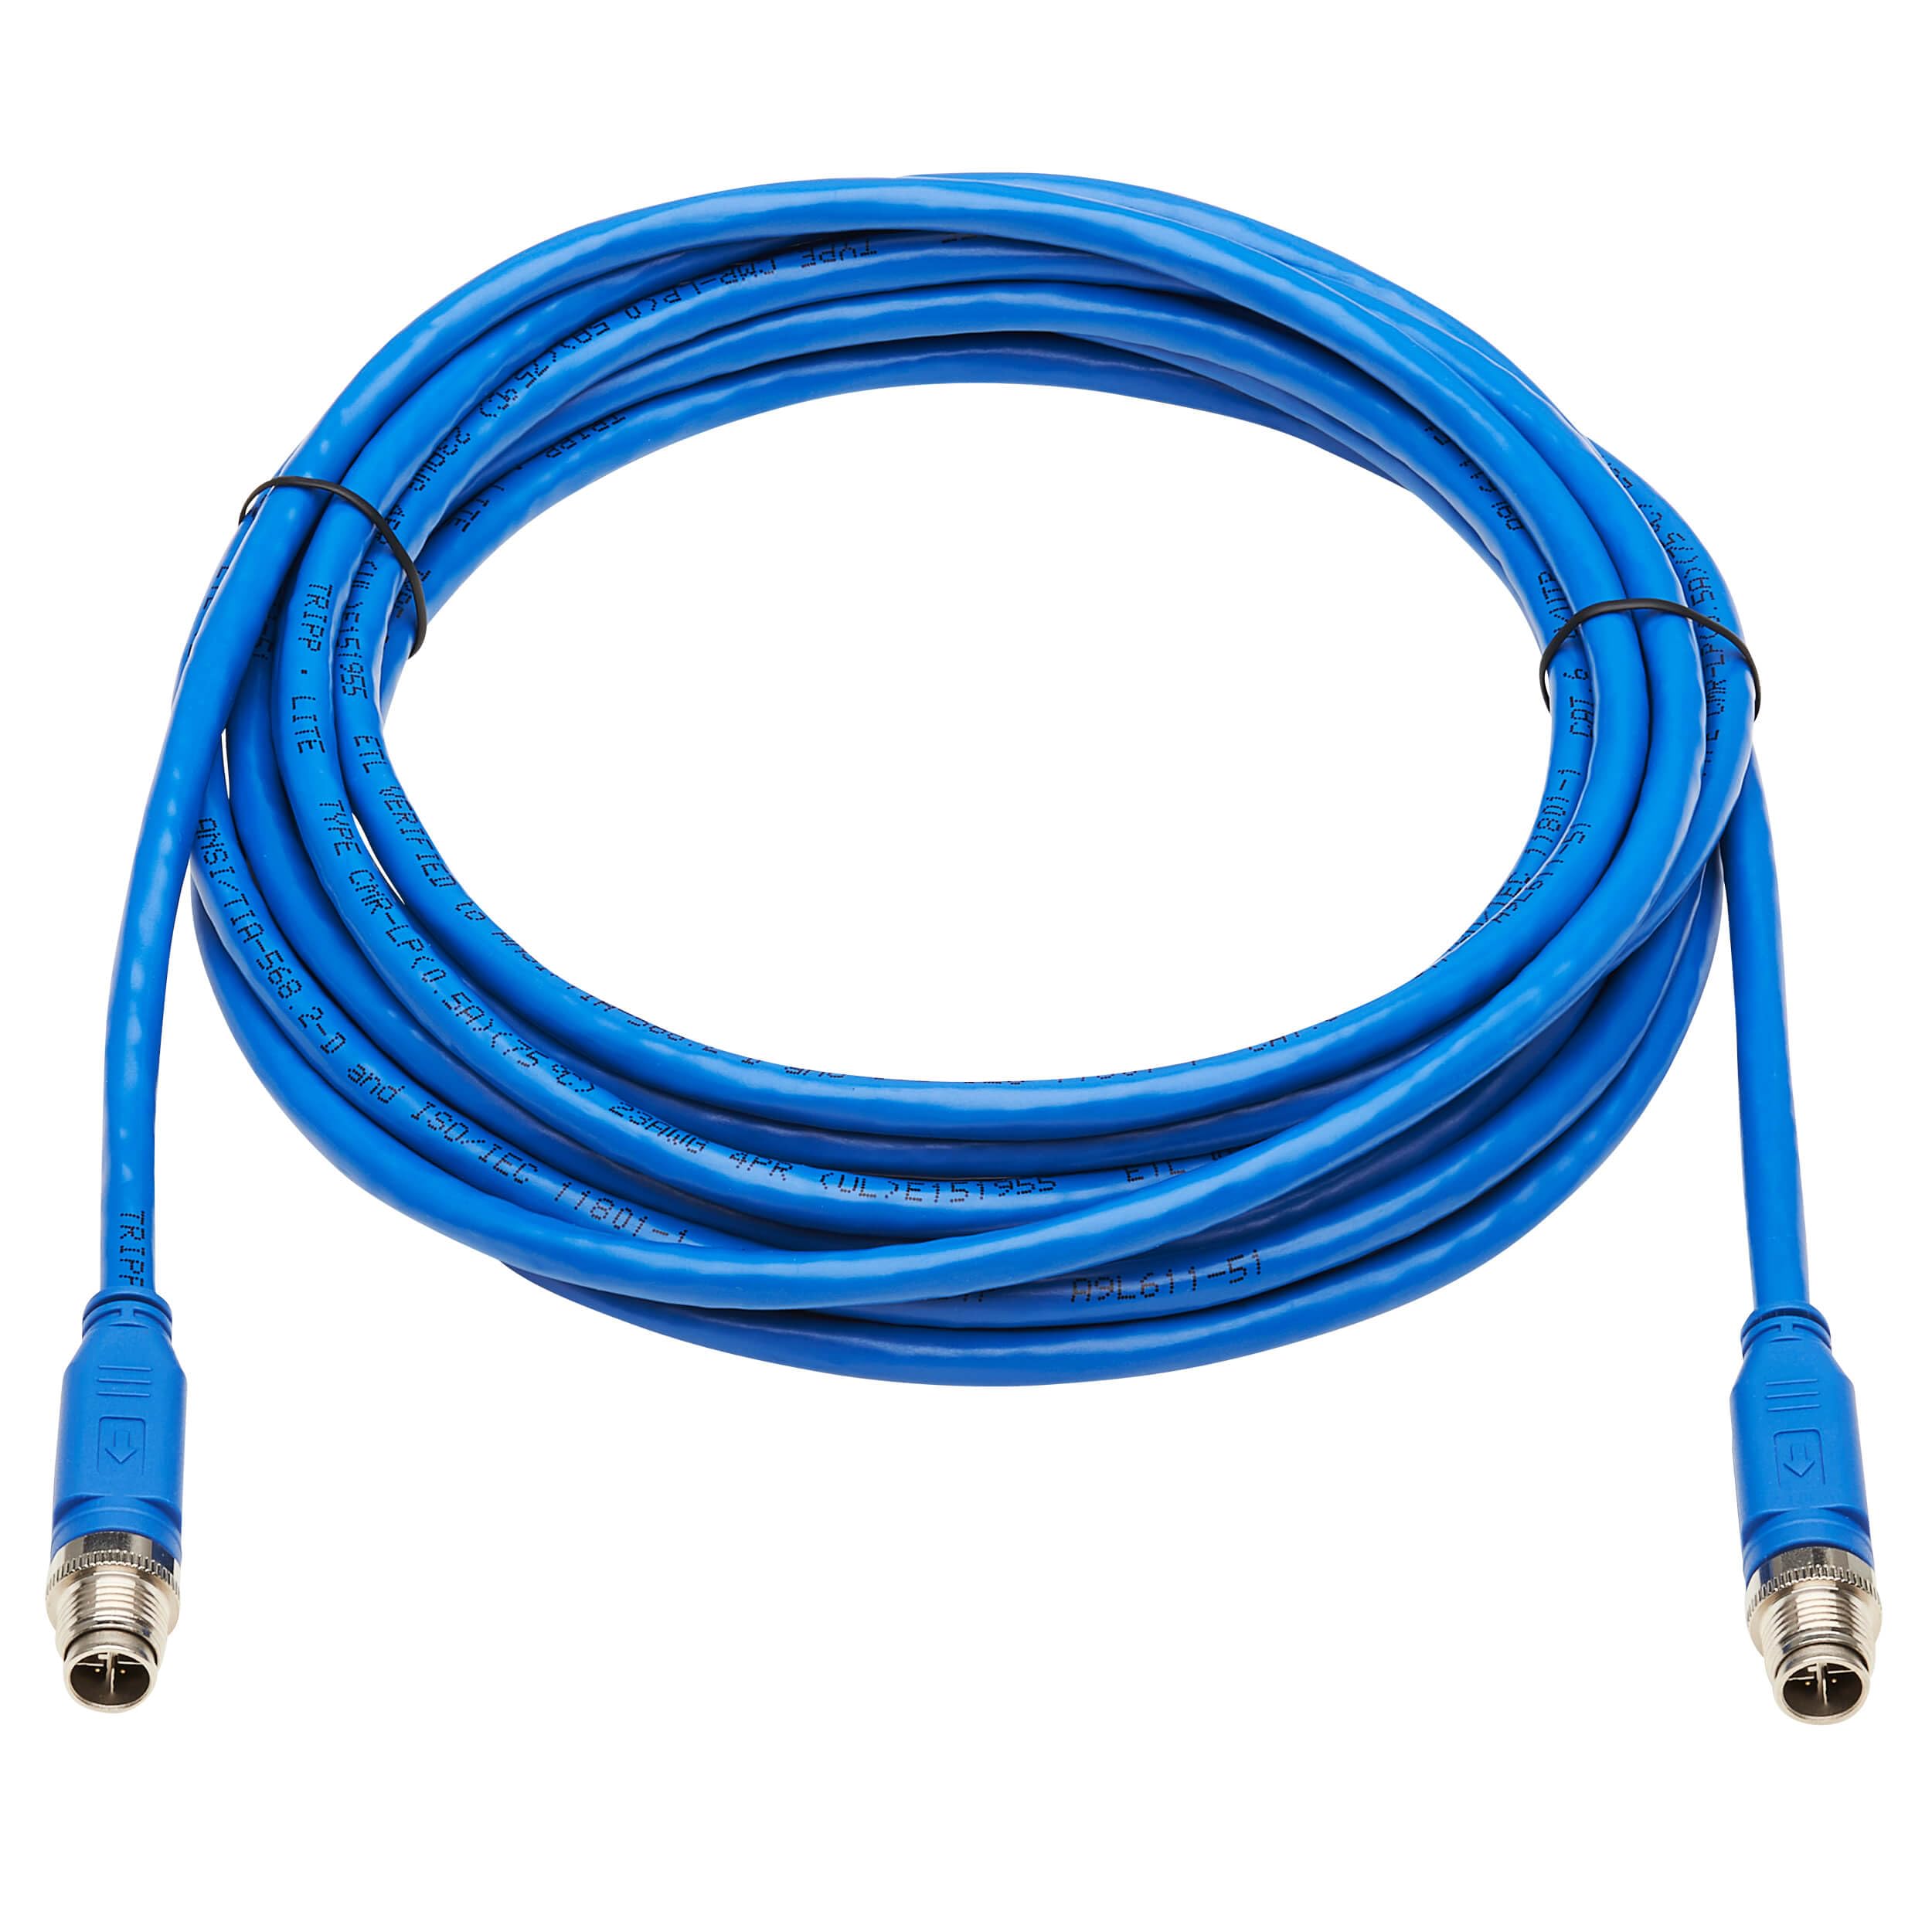 Tripp Lite M12 X-Code Cat6 Ethernet Cable Blue (M/M), 1 Gbps, UTP, UL CMR-LP Certified for 60W PoE, Heavy-Duty IP68 Rating, 9.8 Feet / 3 Meters, (NM12-601-03M-BL)